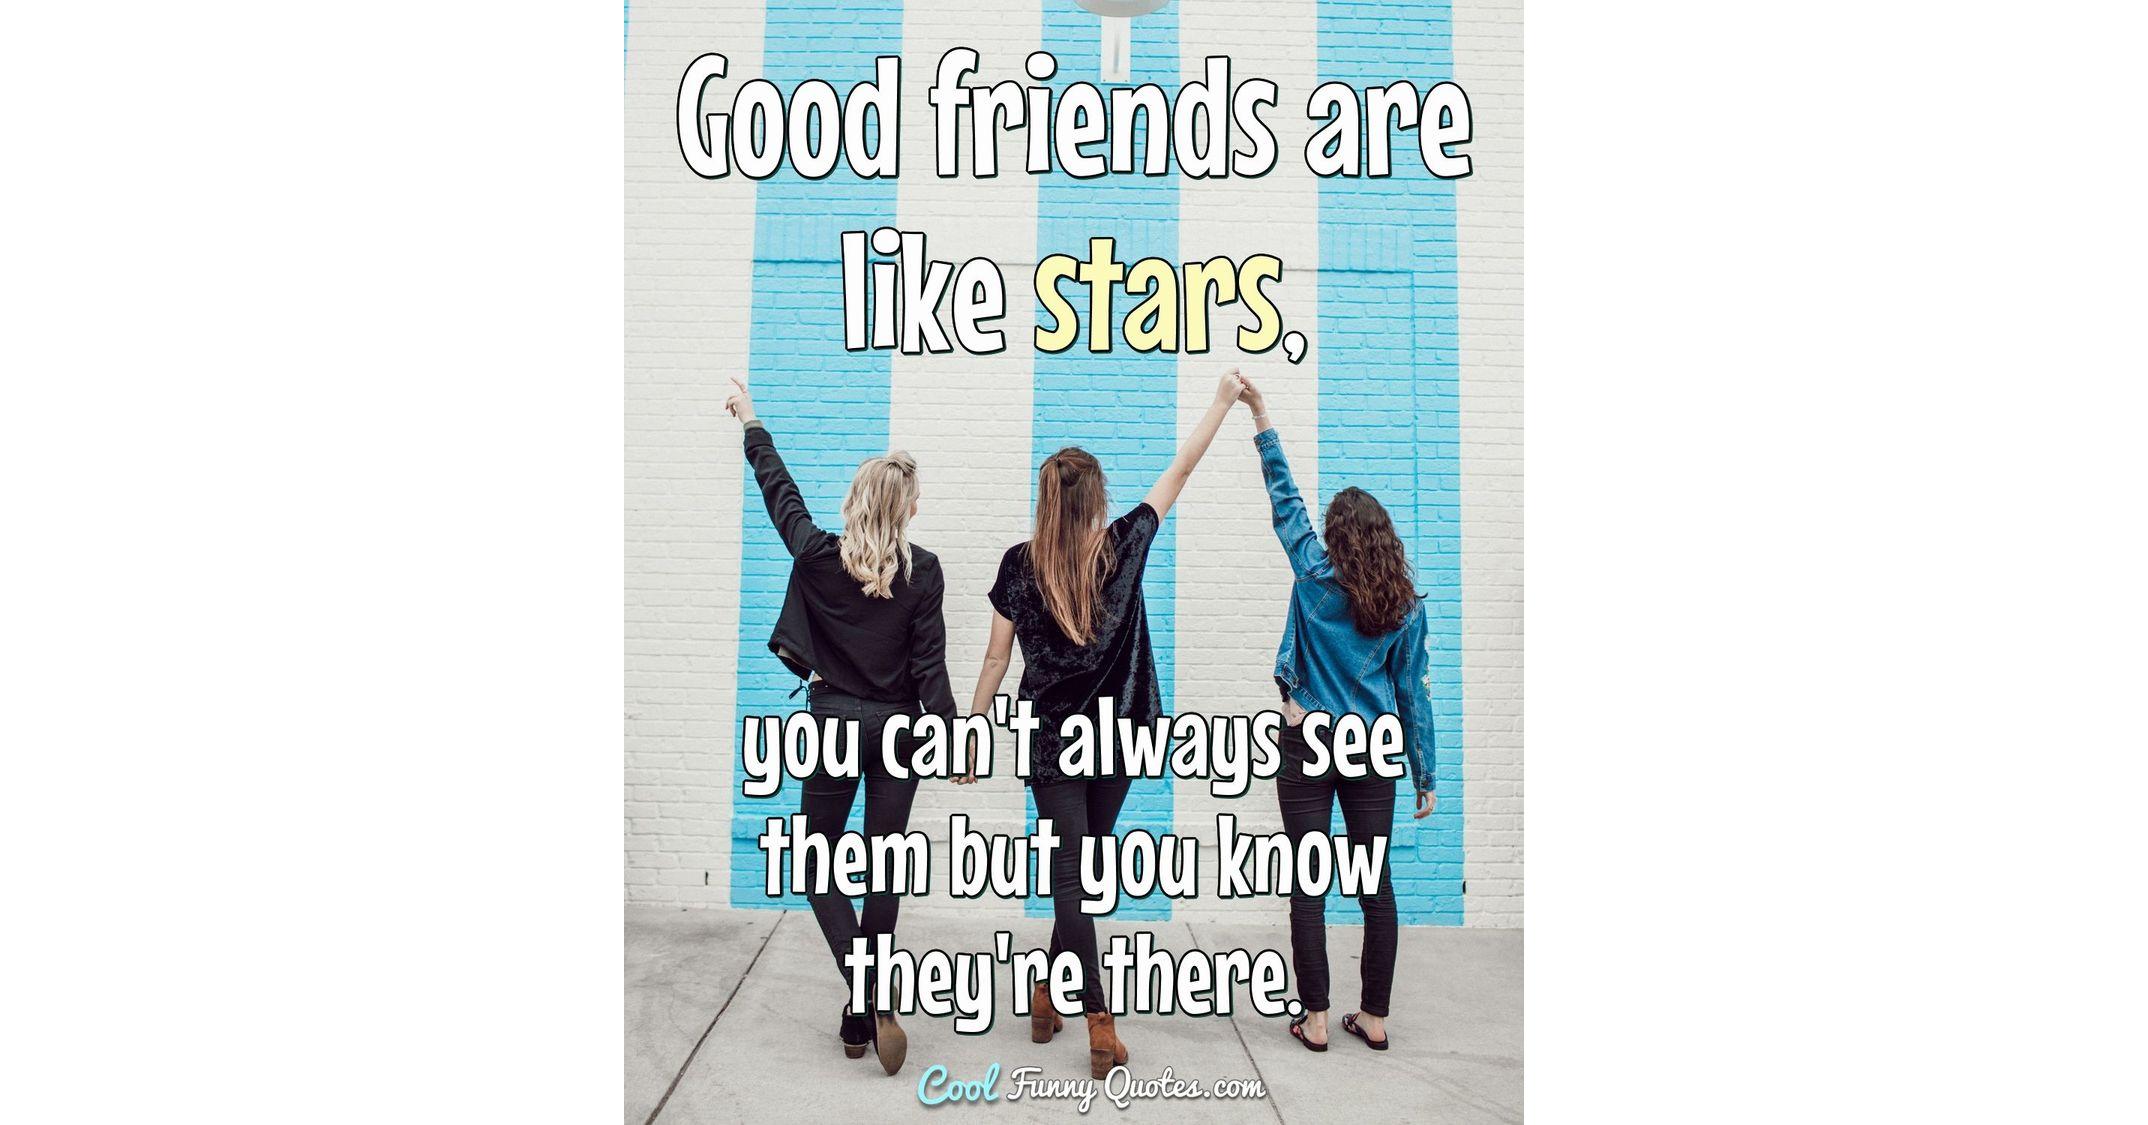 Good friends are like stars, you can't always see them but you know